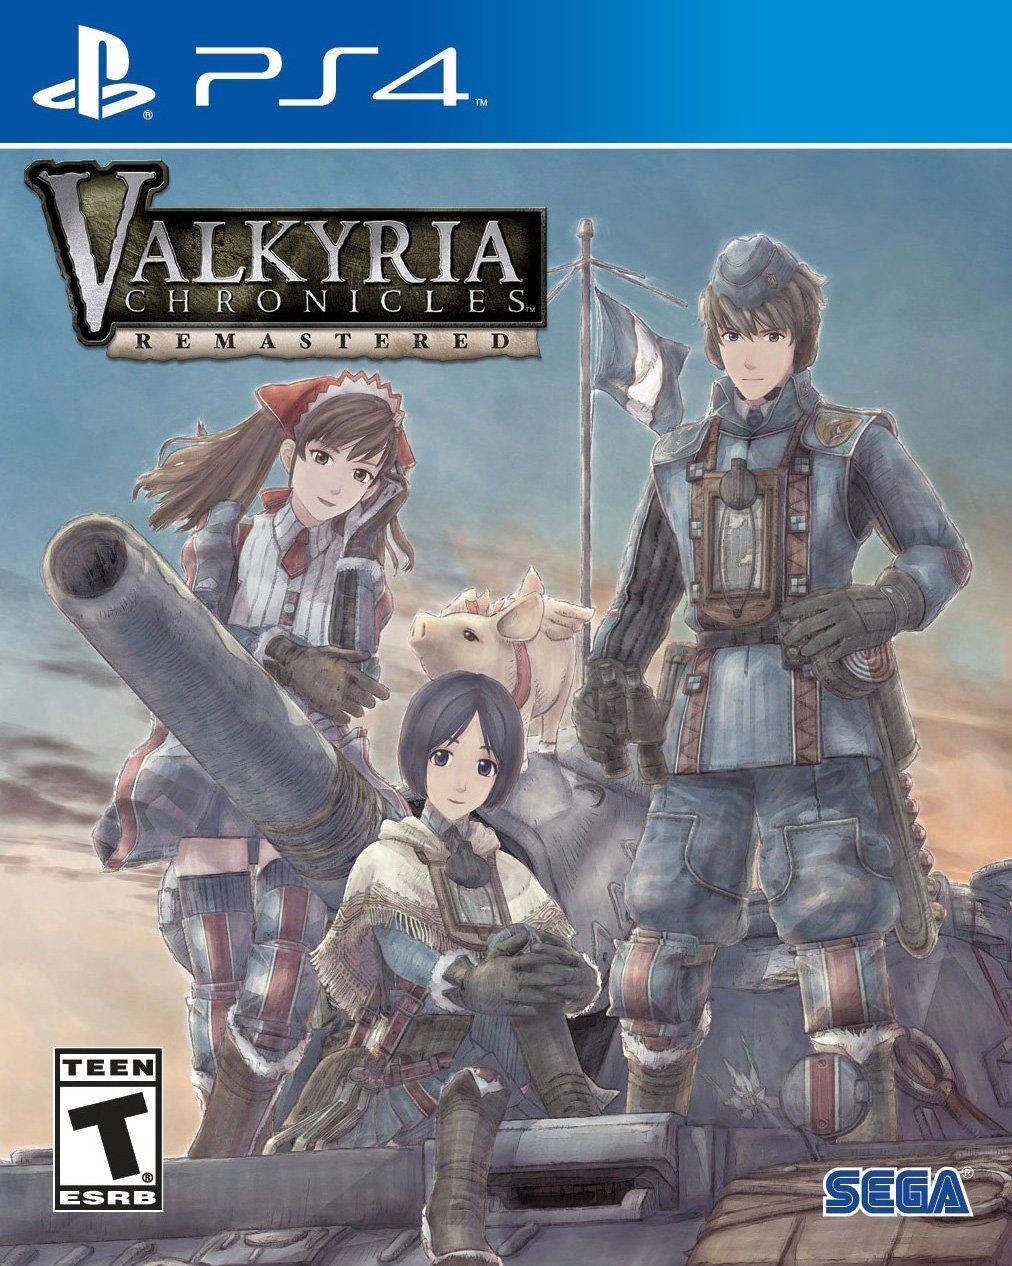 Valkyriachronicles Ps4-poster. Wallpaper